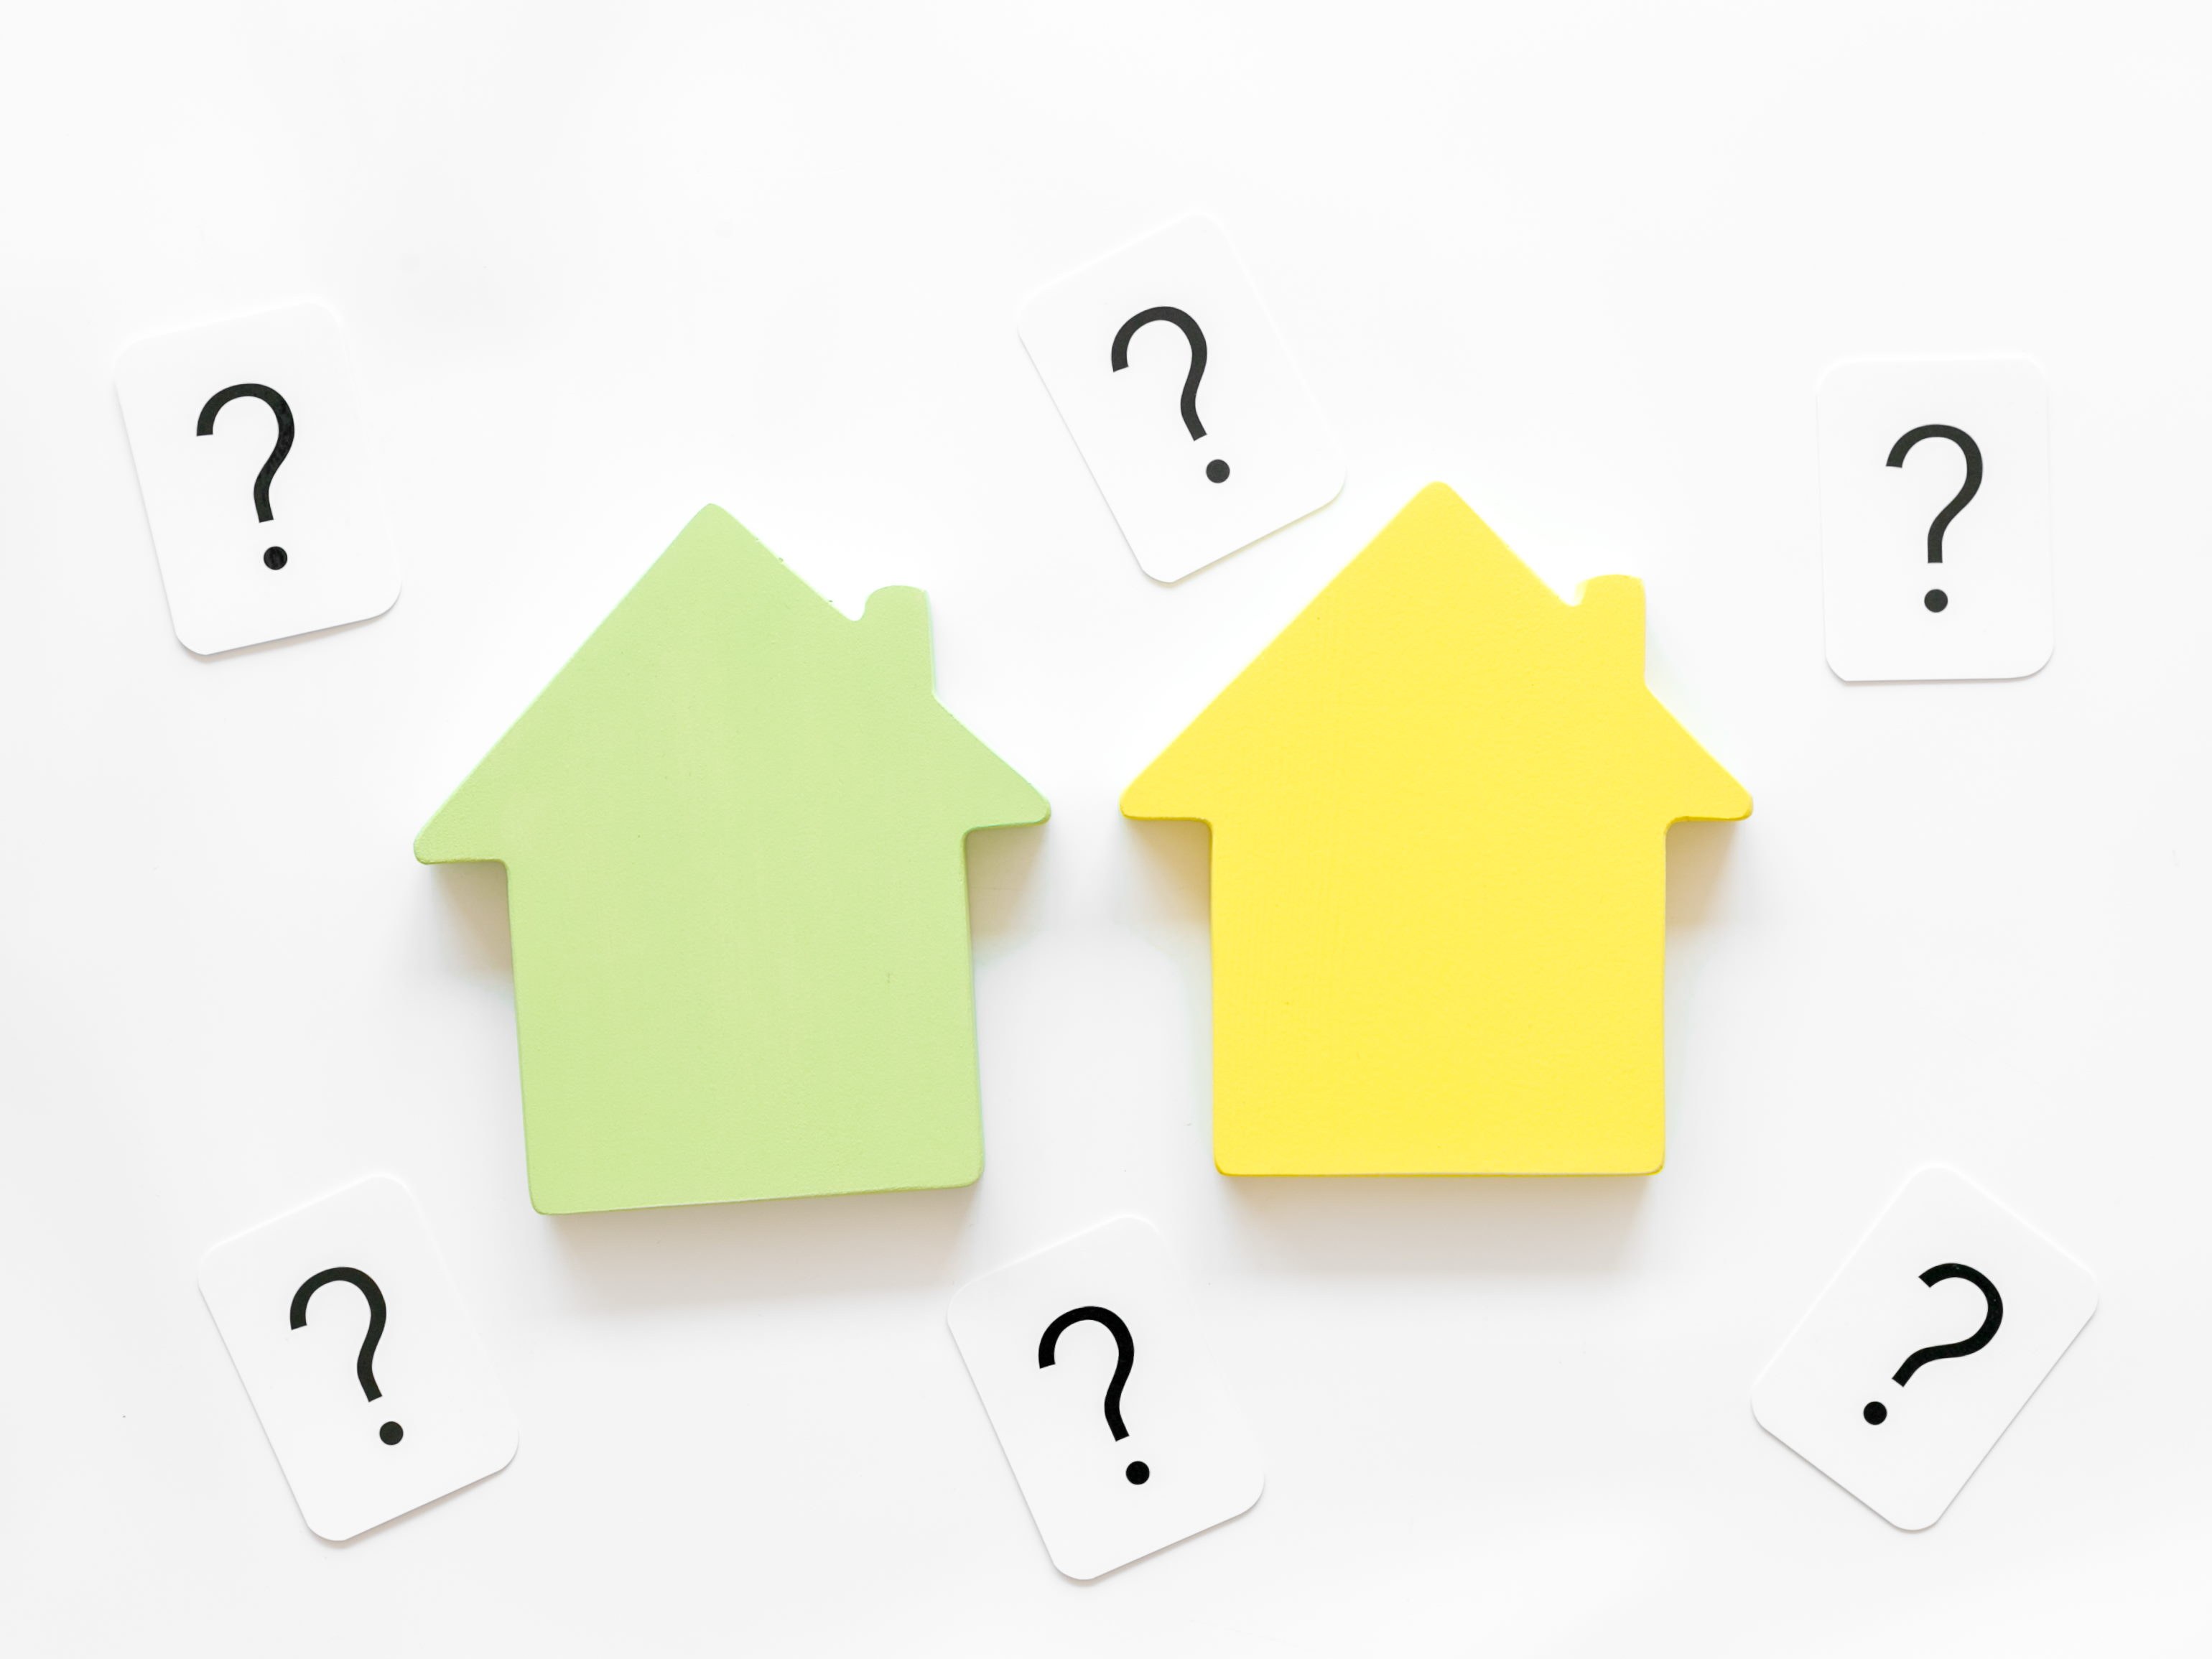 10 questions to ask estate agents when selling your home